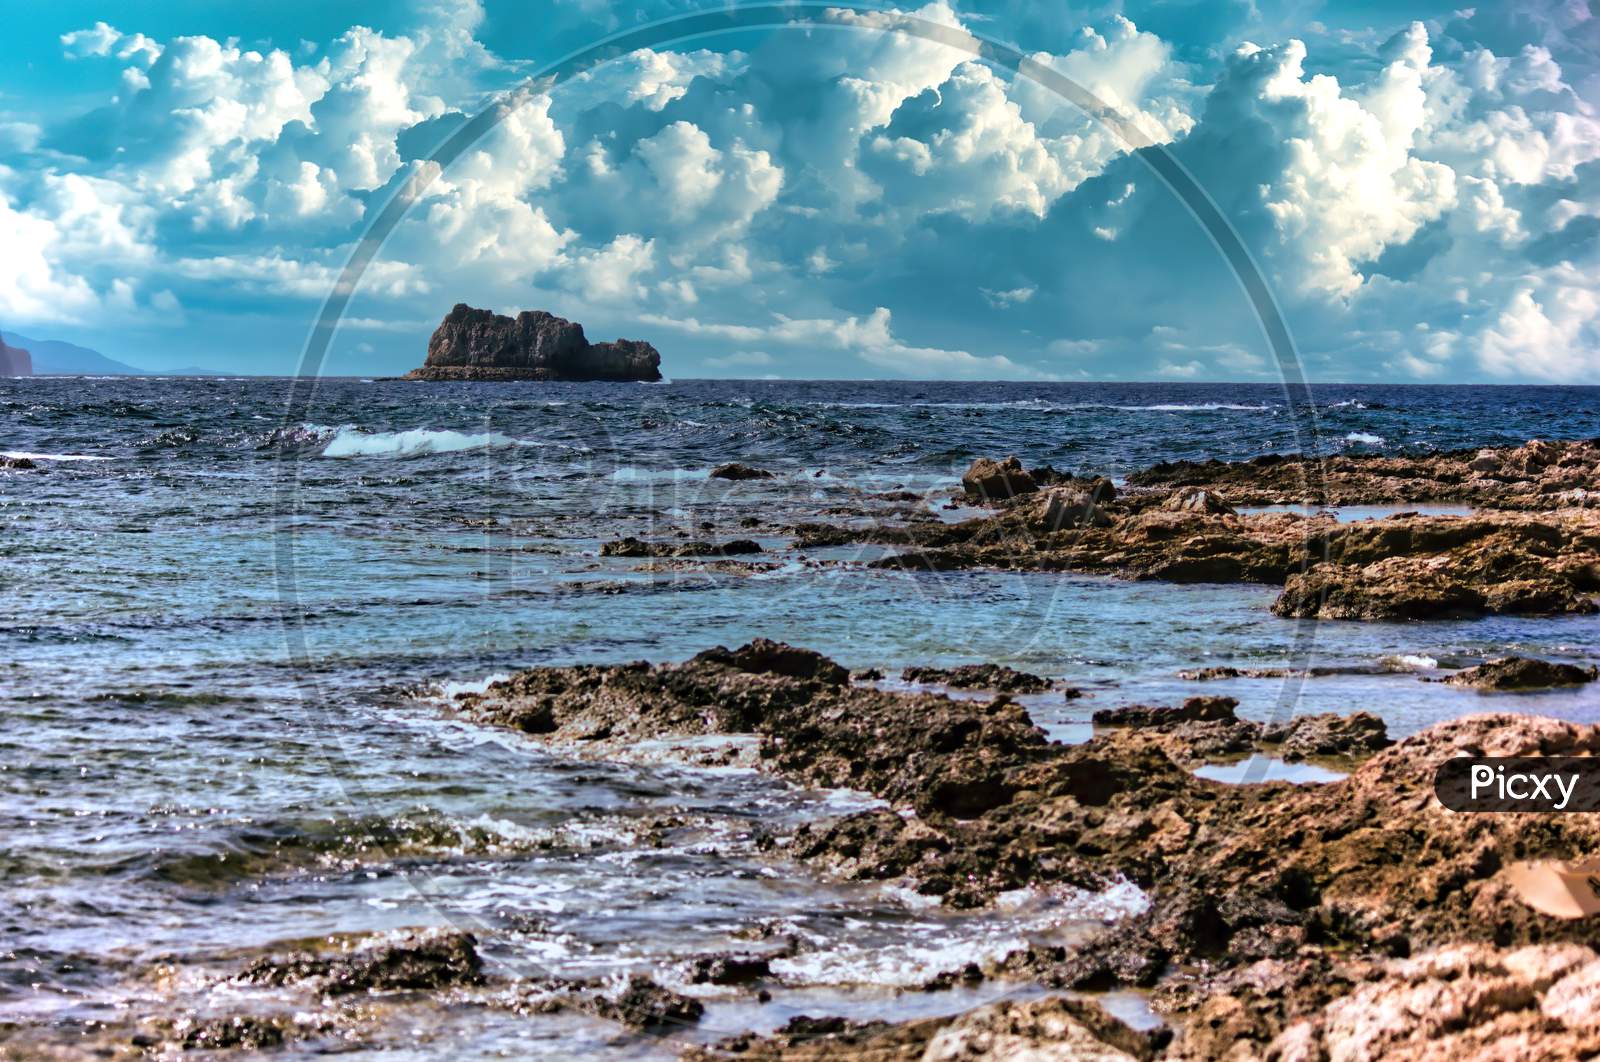 A Landscape View Across The Sea From Imeri Gramvousa To Cape Gramvousa, Kissamos, Crete, Greece Against Dramatic Clouds And Rocky Terrain